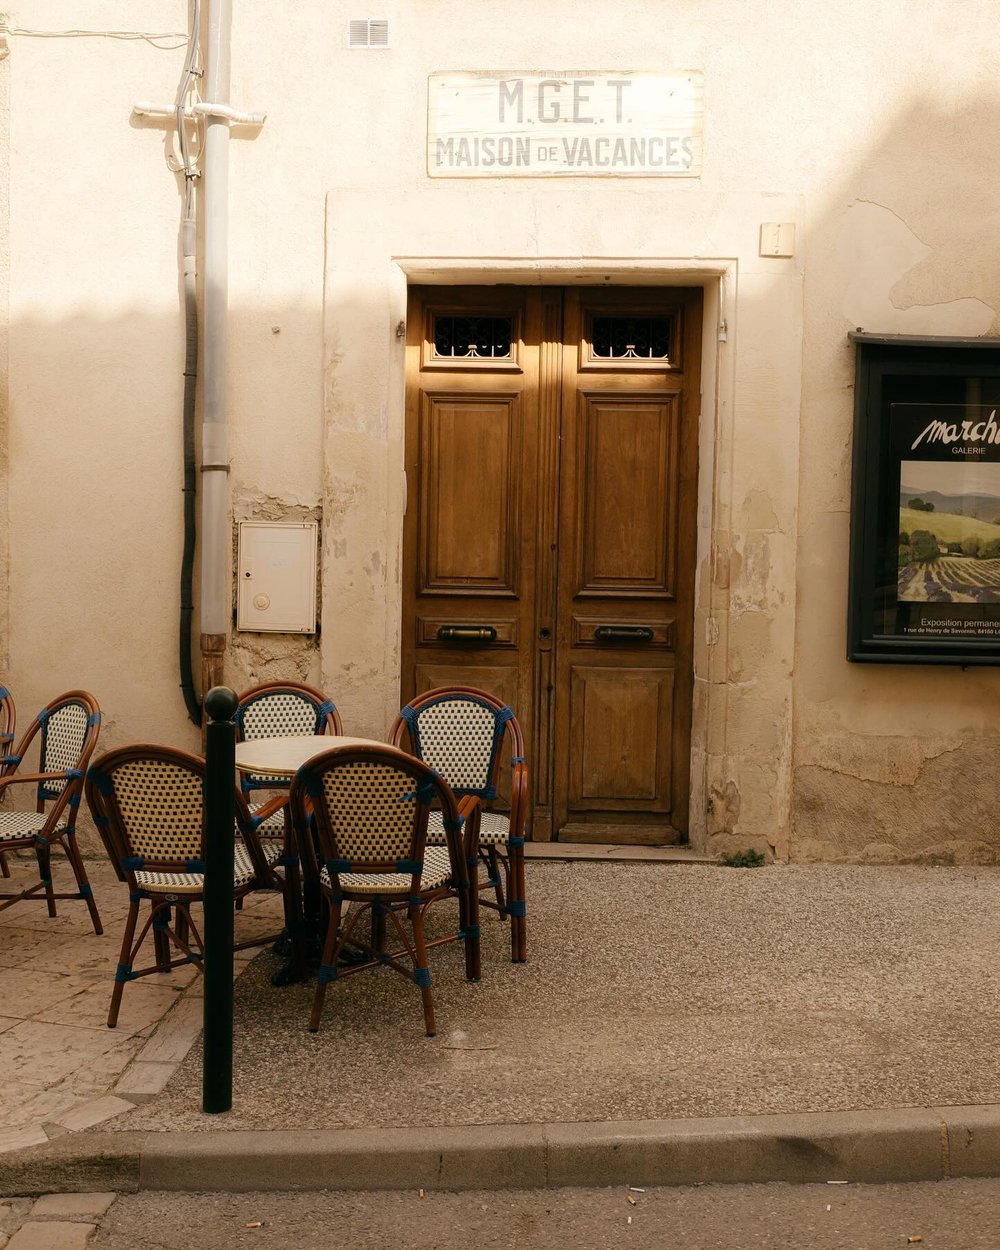 From our recent mid-March trip to Provence: a lunch stop in our favorite village in the Luberon, Lourmarin.